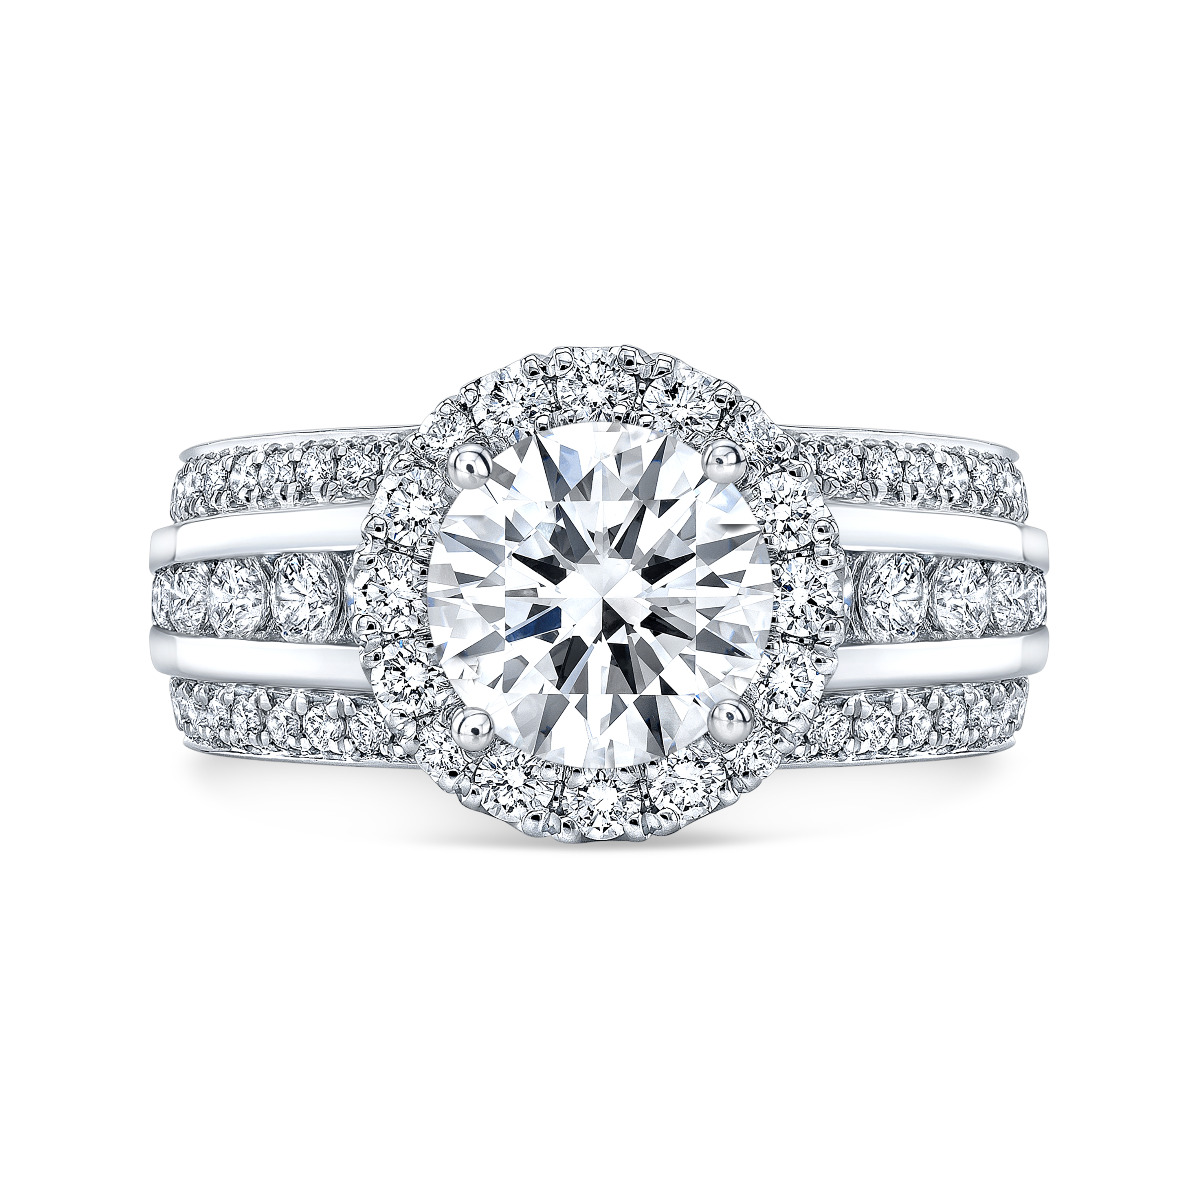 Round Brilliant Cut Diamond Halo Engagement Ring, 8 Claws Set in an  Illusion Halo on a